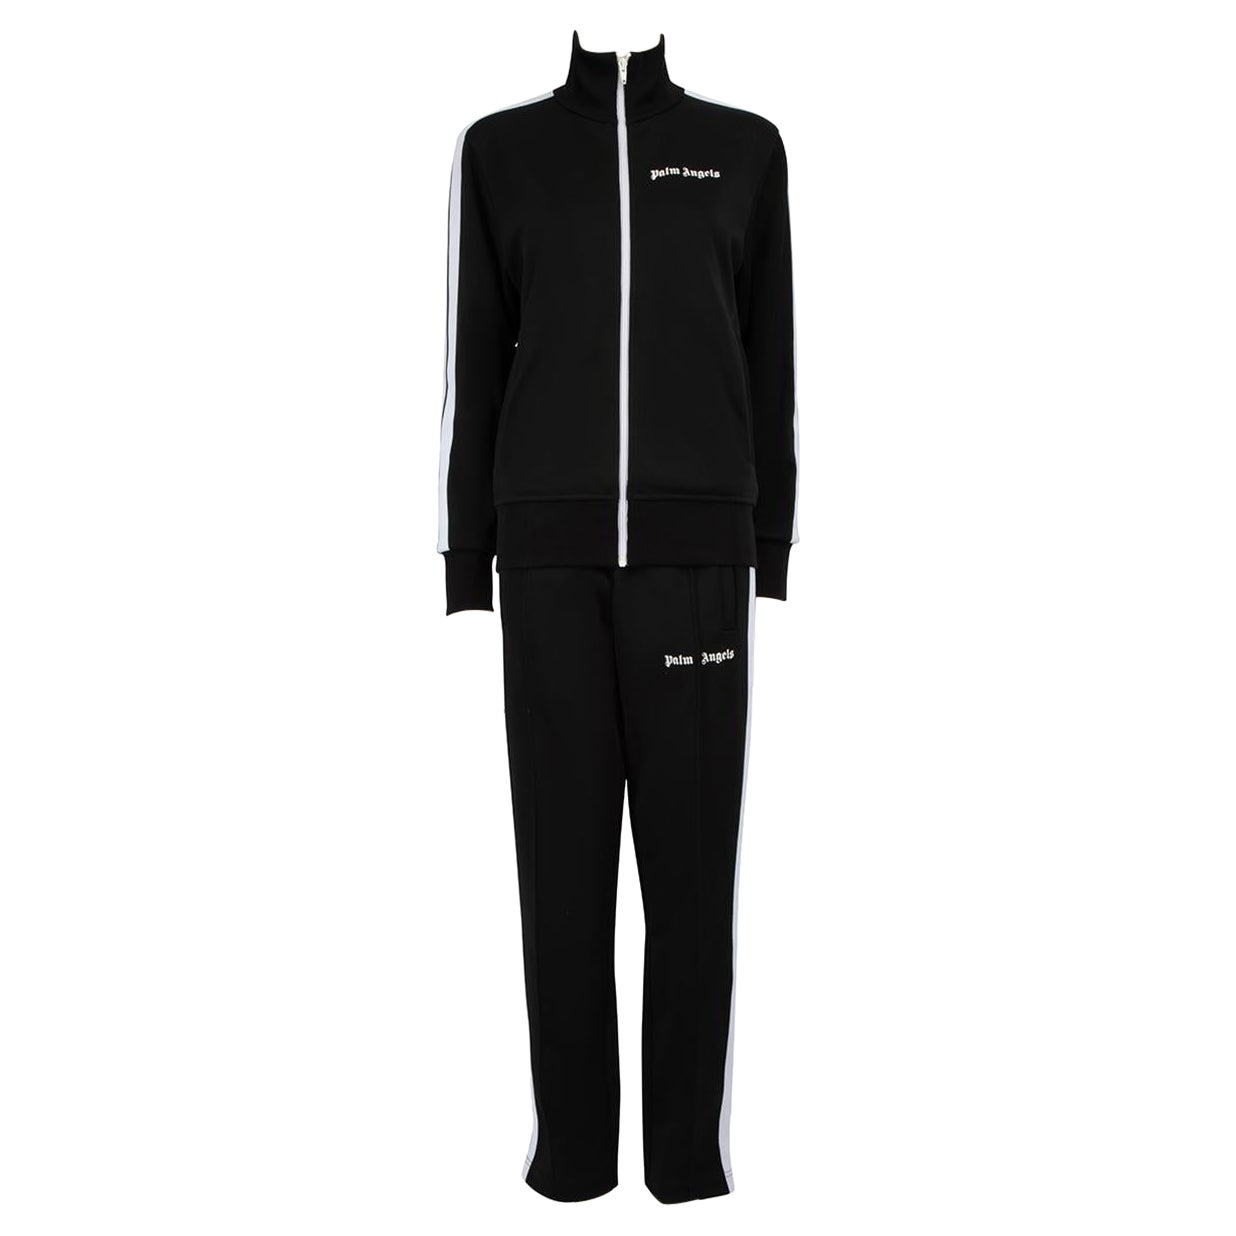 Palm Angels Black Striped Logo Tracksuits Size S For Sale